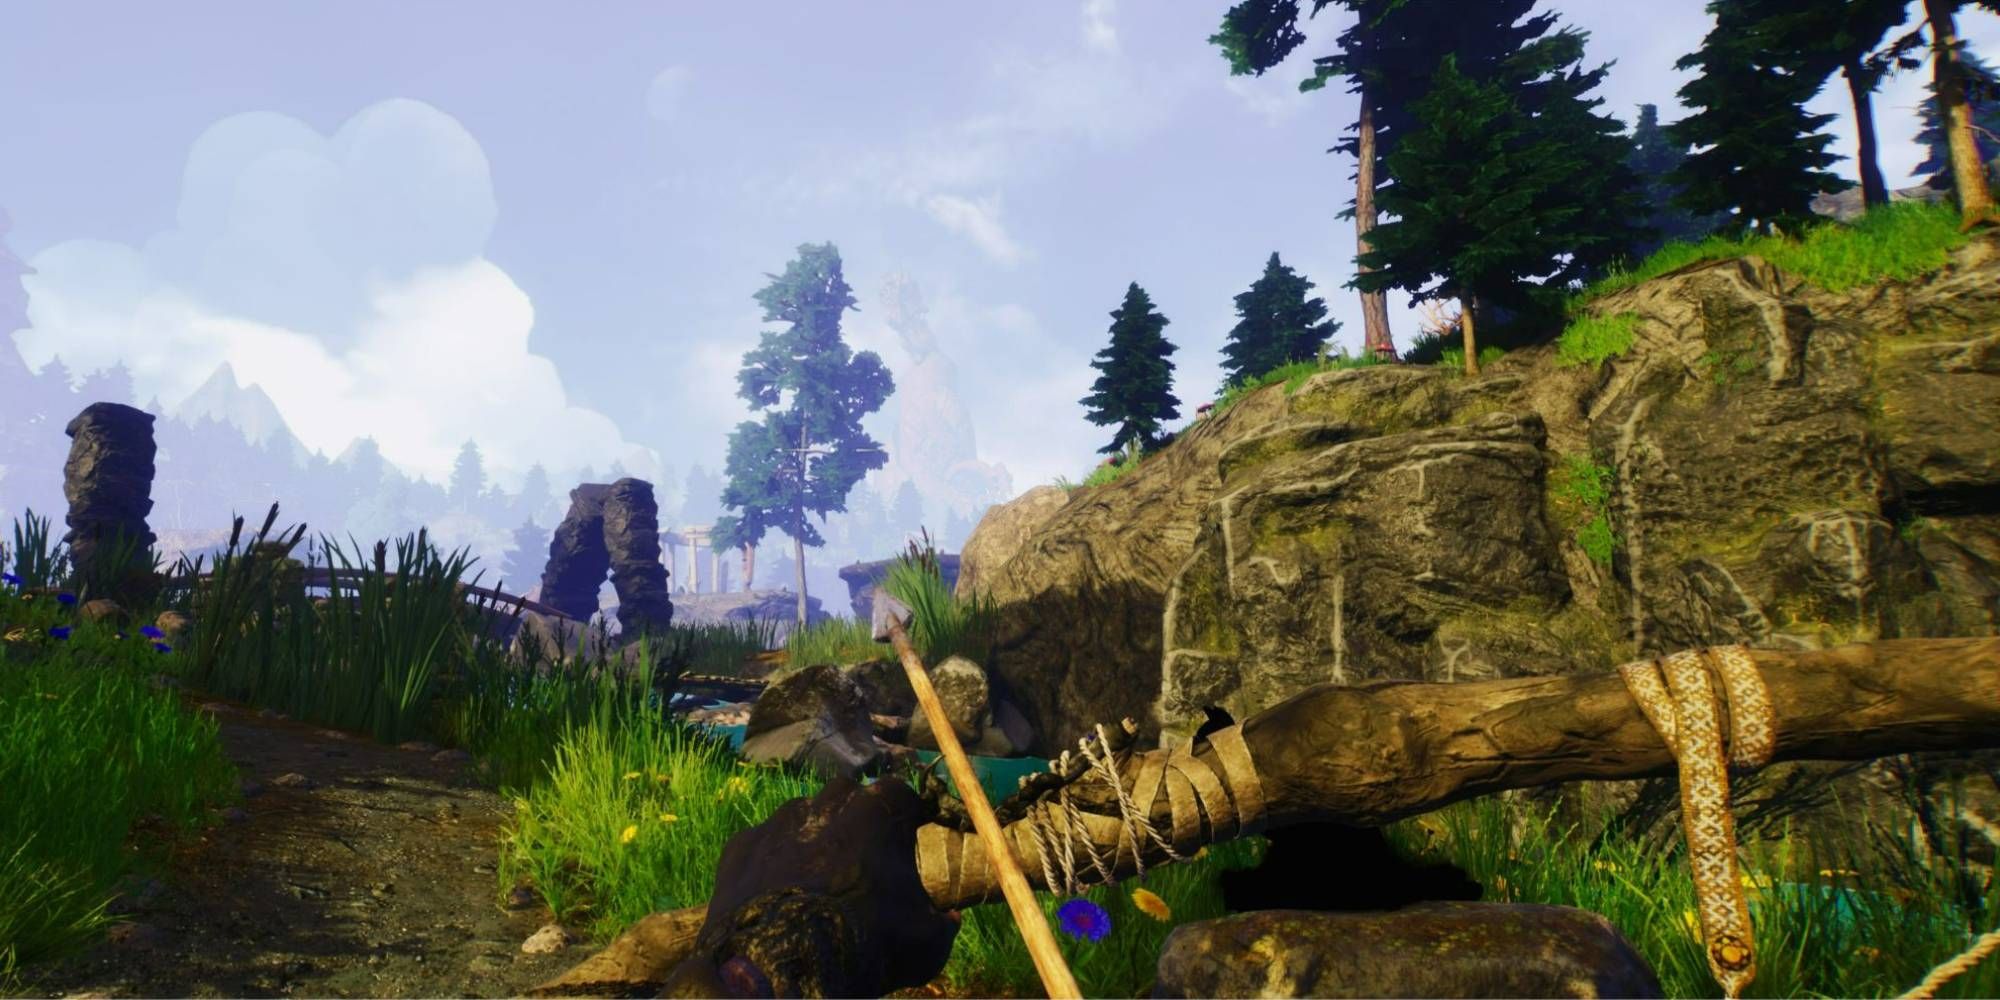 Blacktail Skill Tree feature image showing the player looking across in a semi-wooded country scene while holidng a bow and arrow nocked.